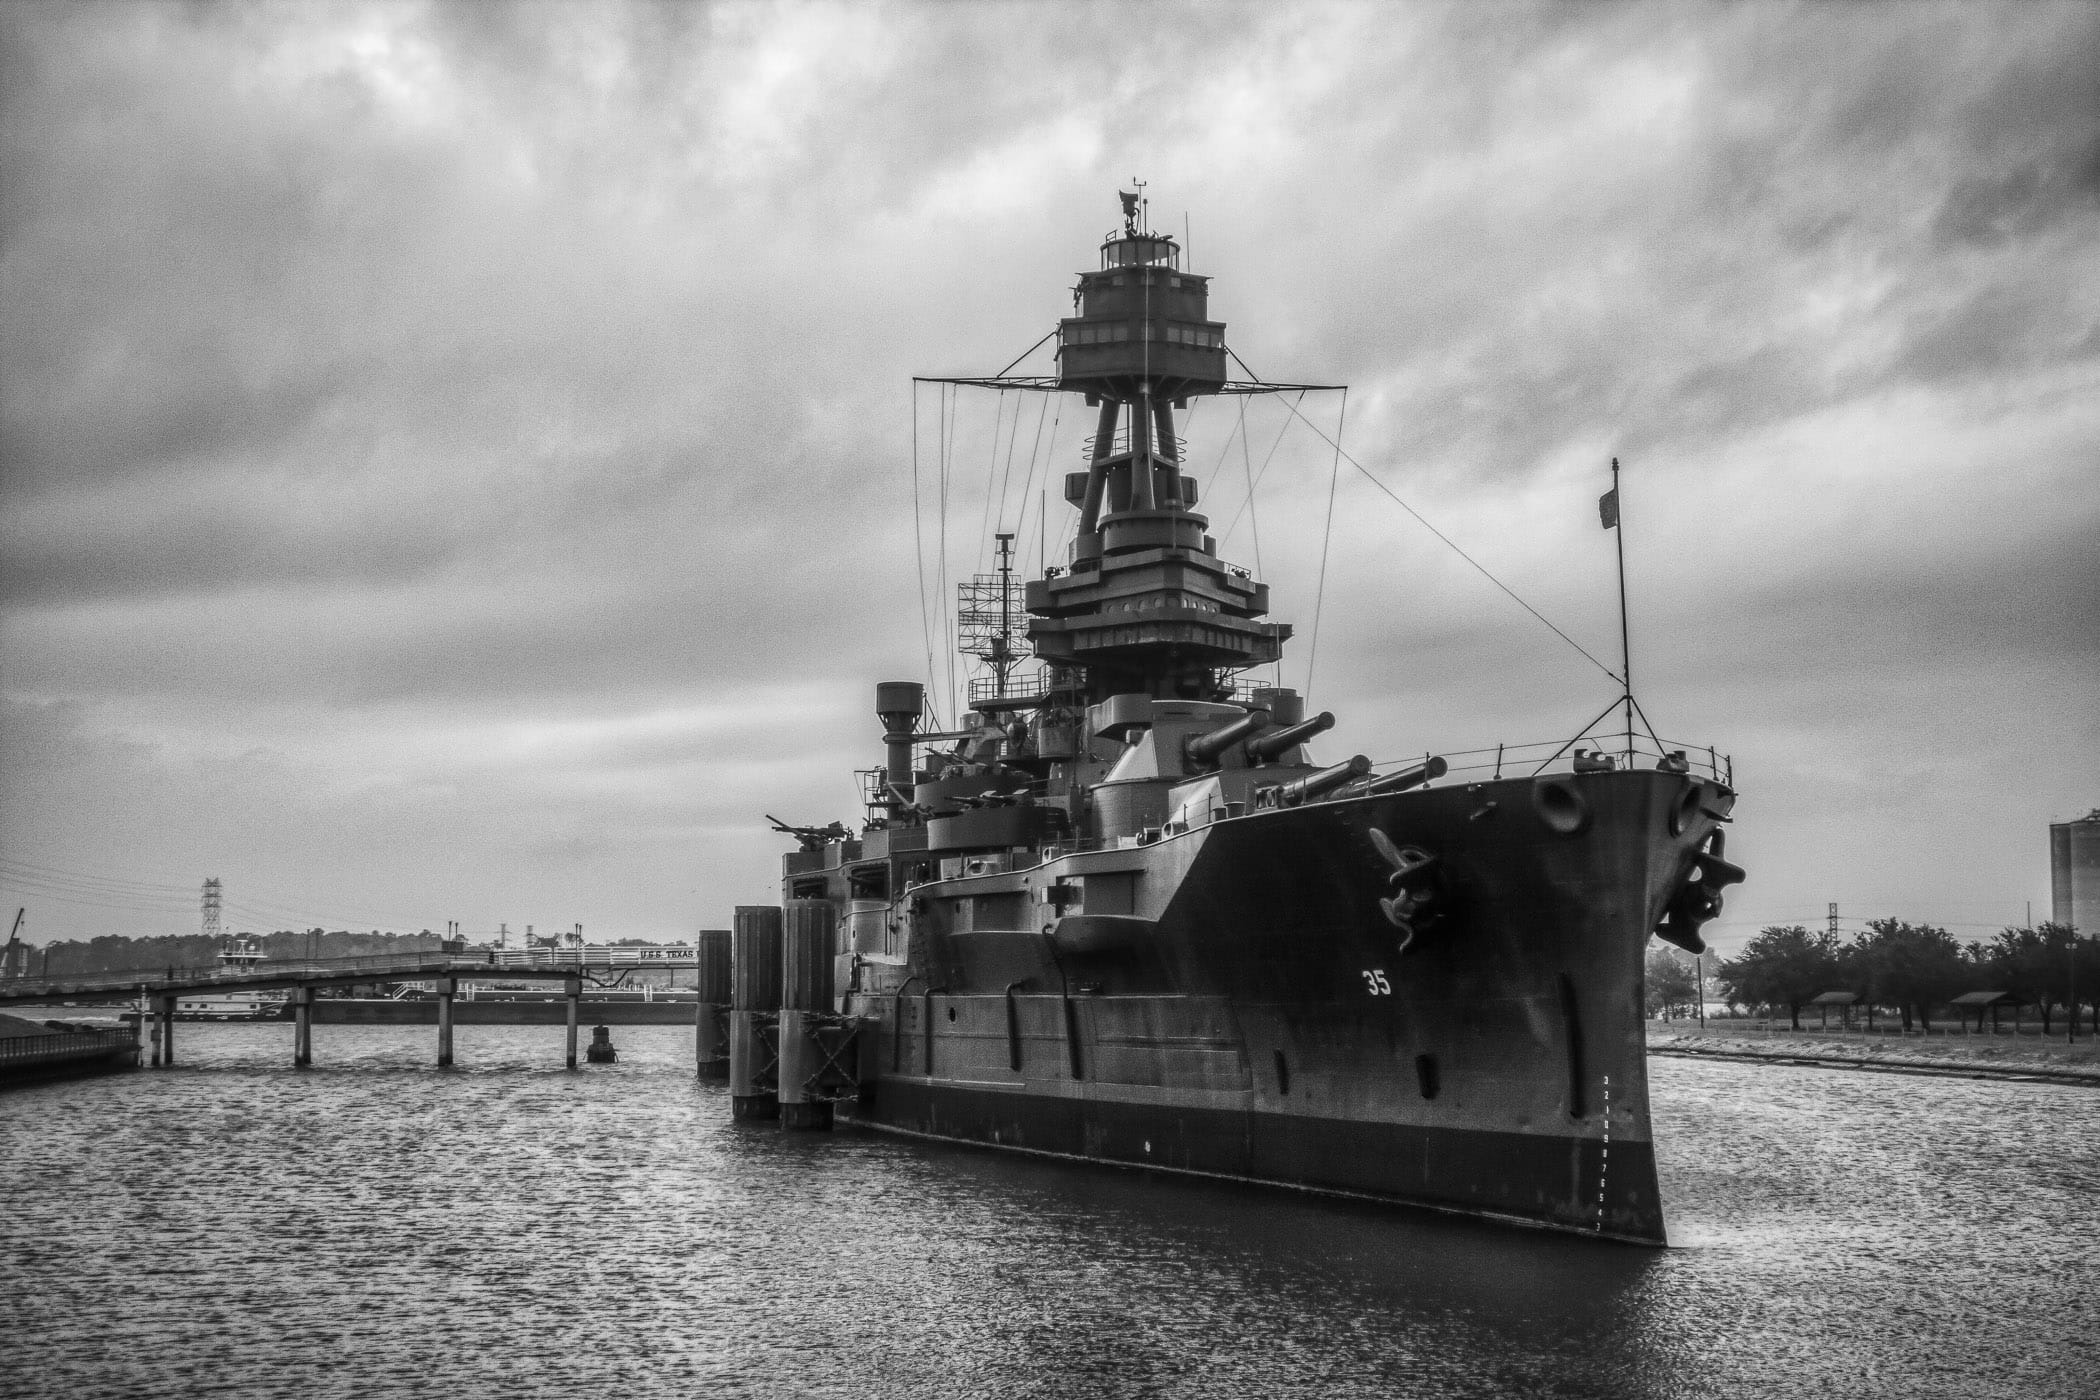 The USS Texas, commissioned in 1914, saw action in both World Wars, including D-Day and at Iwo Jima.  After being decommissioned in 1947, she was permanently moored adjacent to the Houston Ship Channel near the San Jacinto Monument to act as a museum ship.